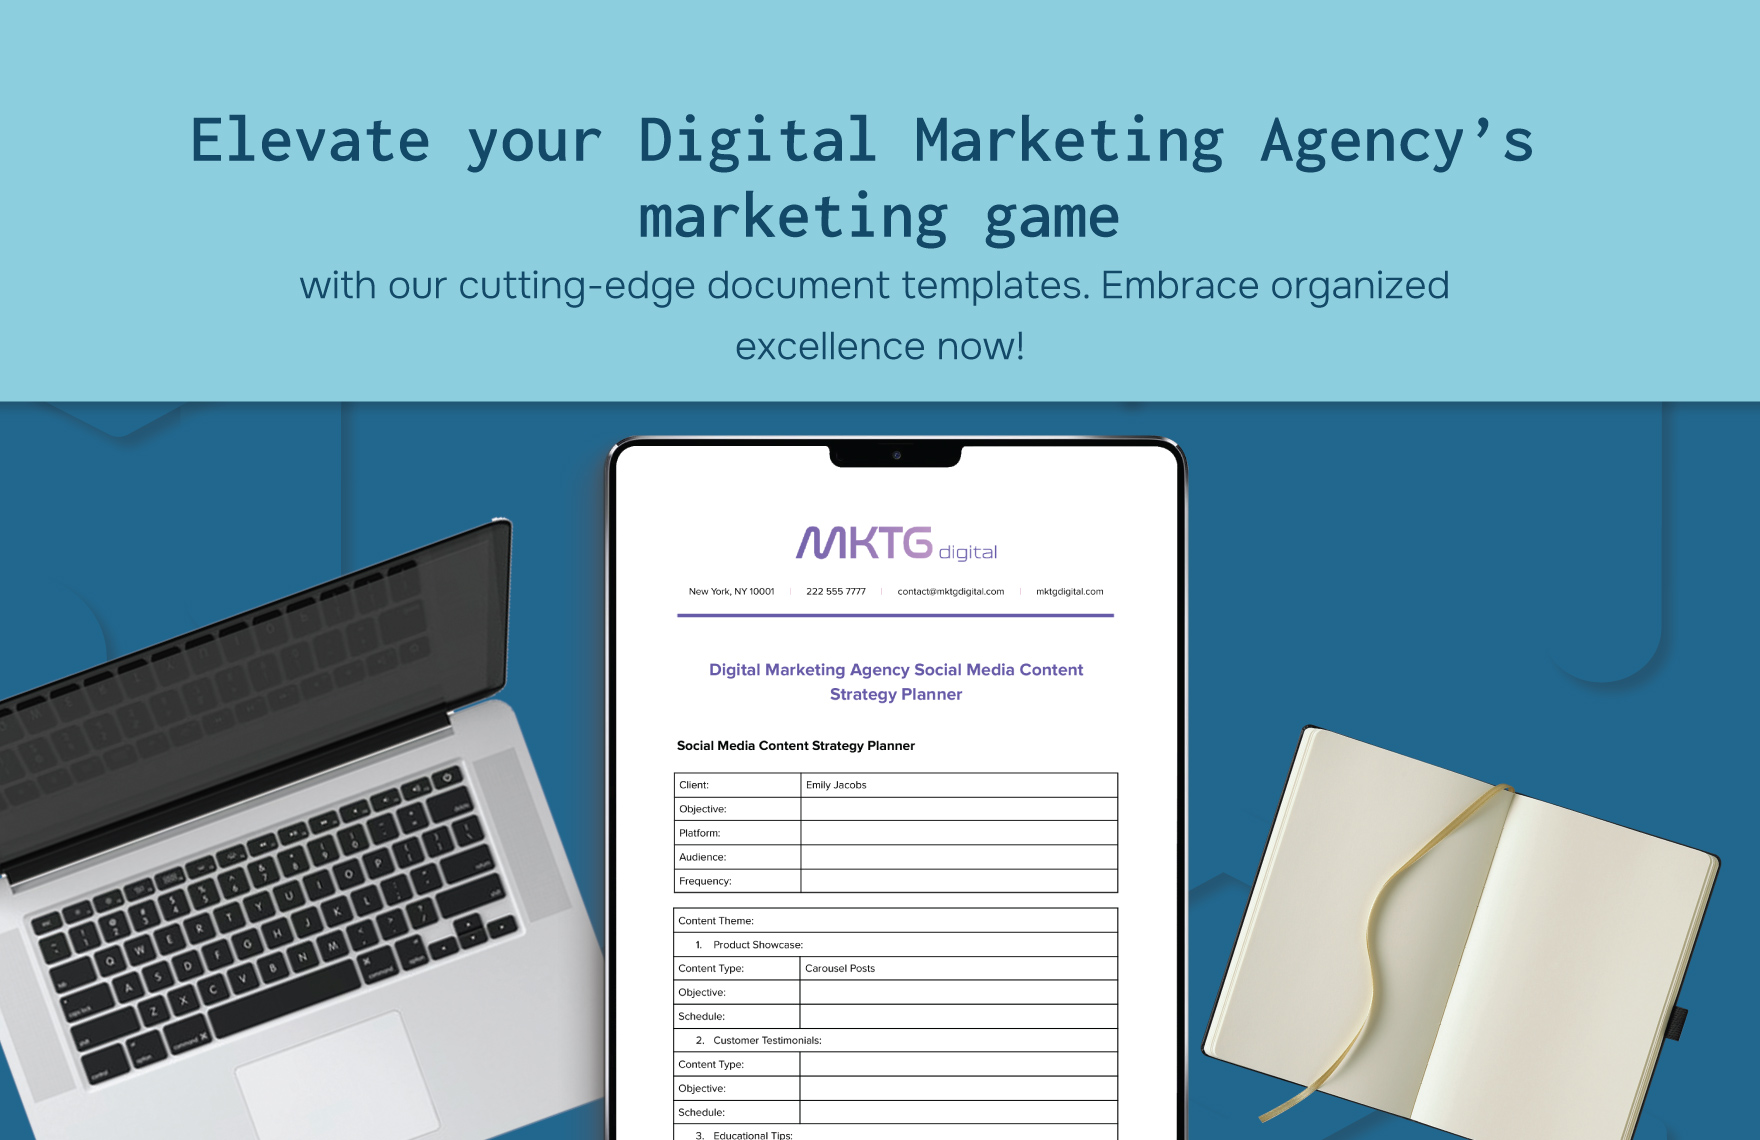 Digital Marketing Agency Social Media Content Strategy Planner Template